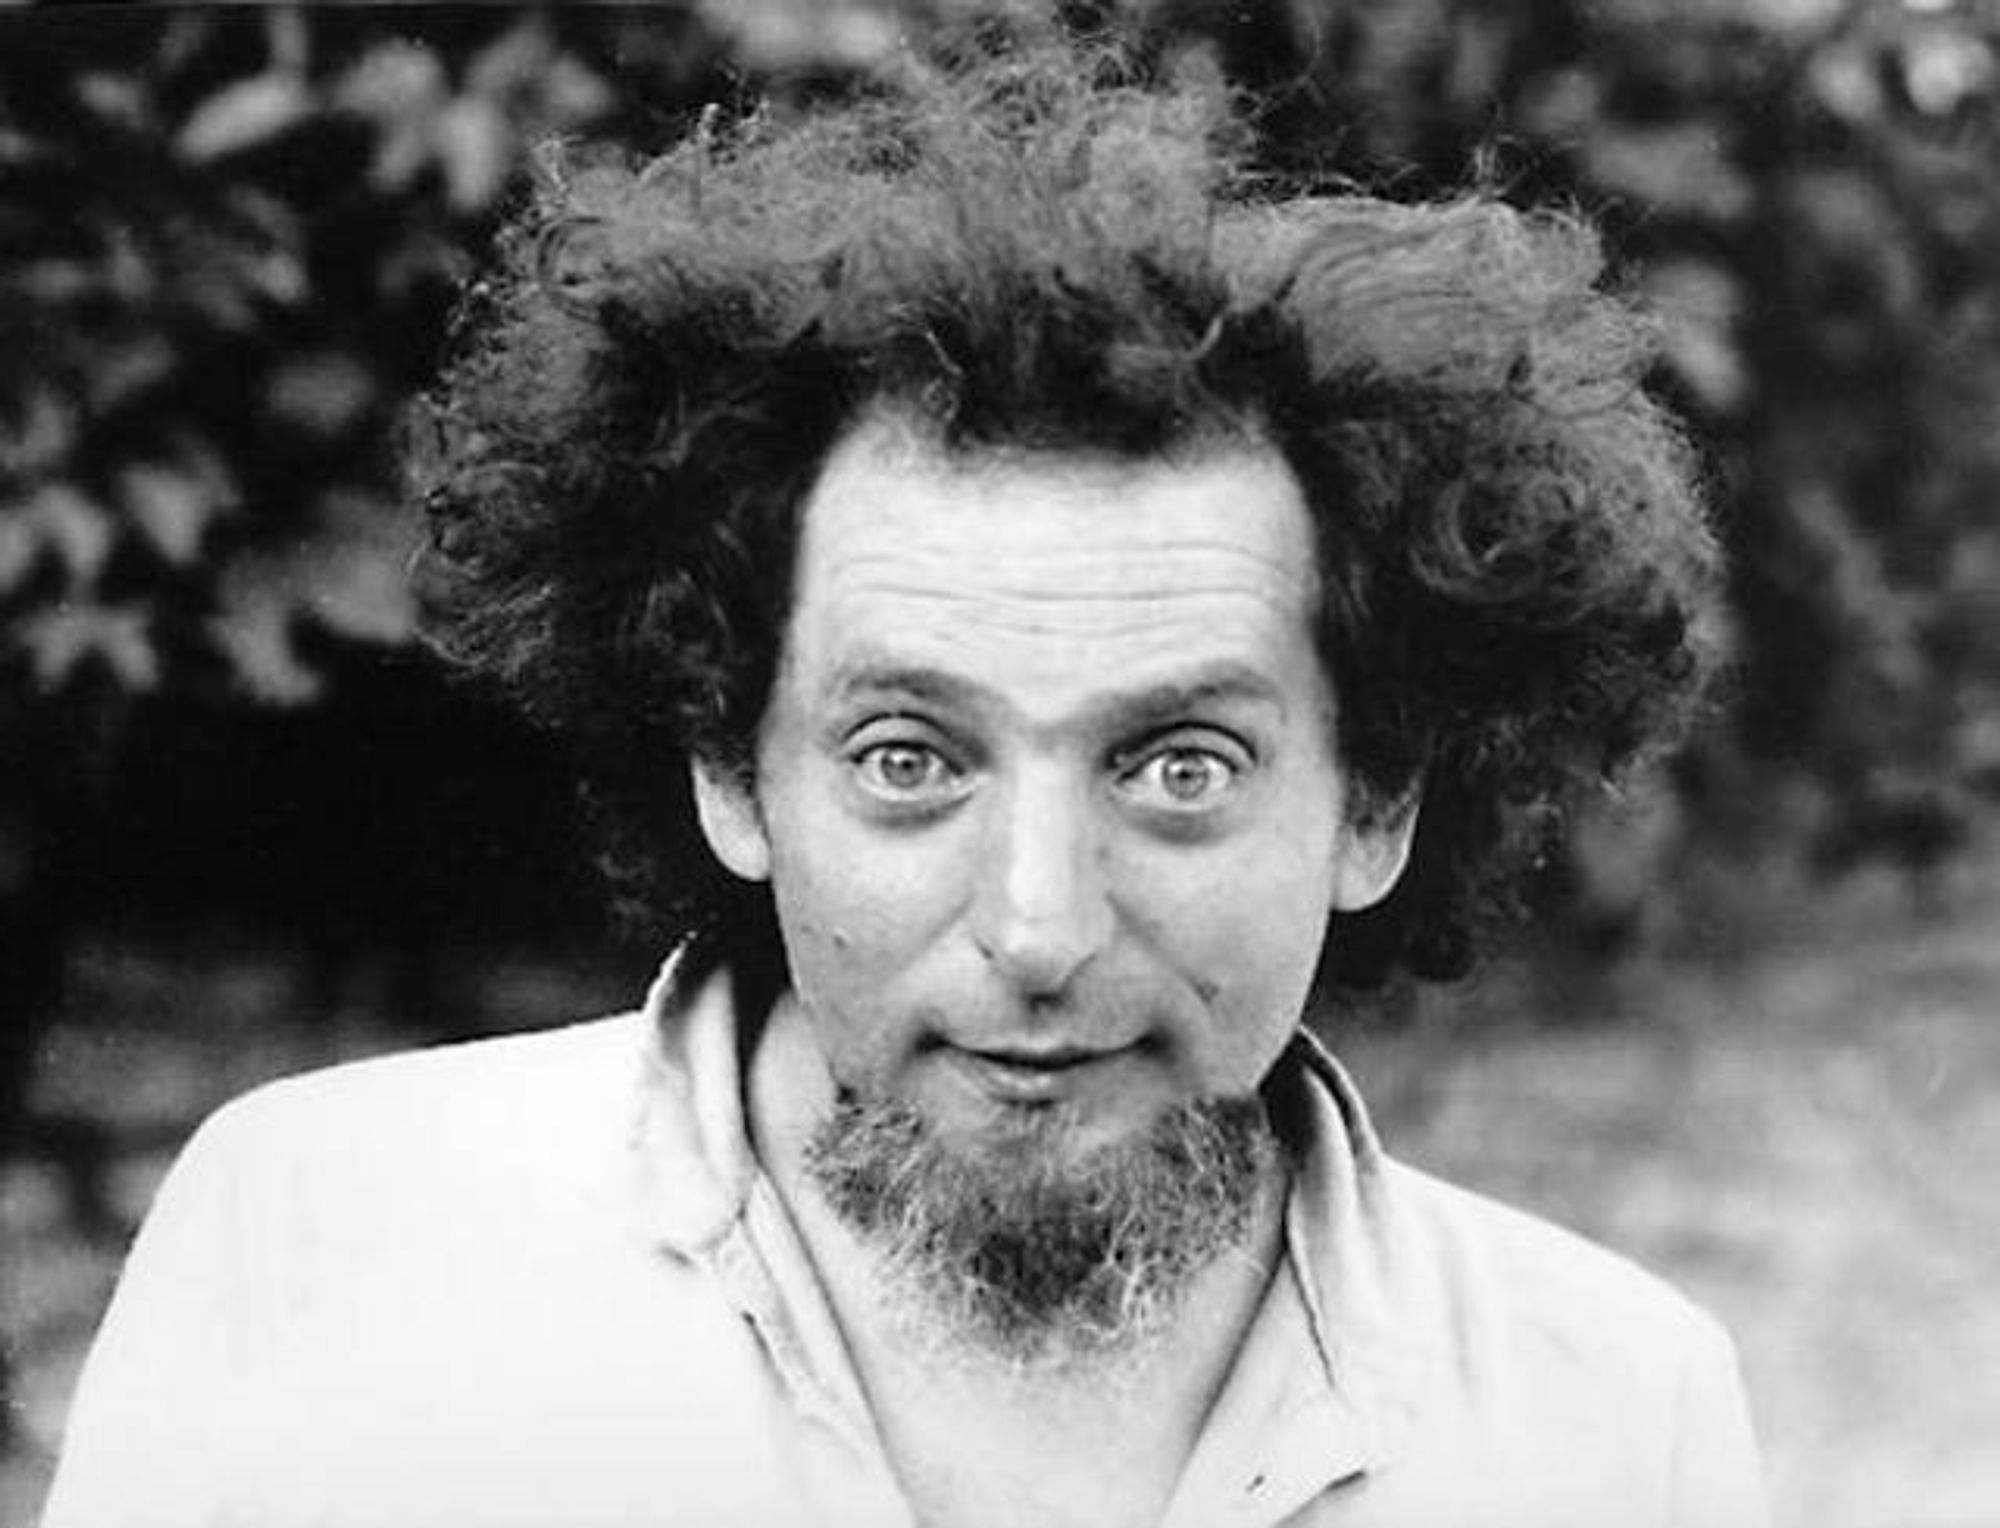 Photograph of a startled-looking Georges Perec.